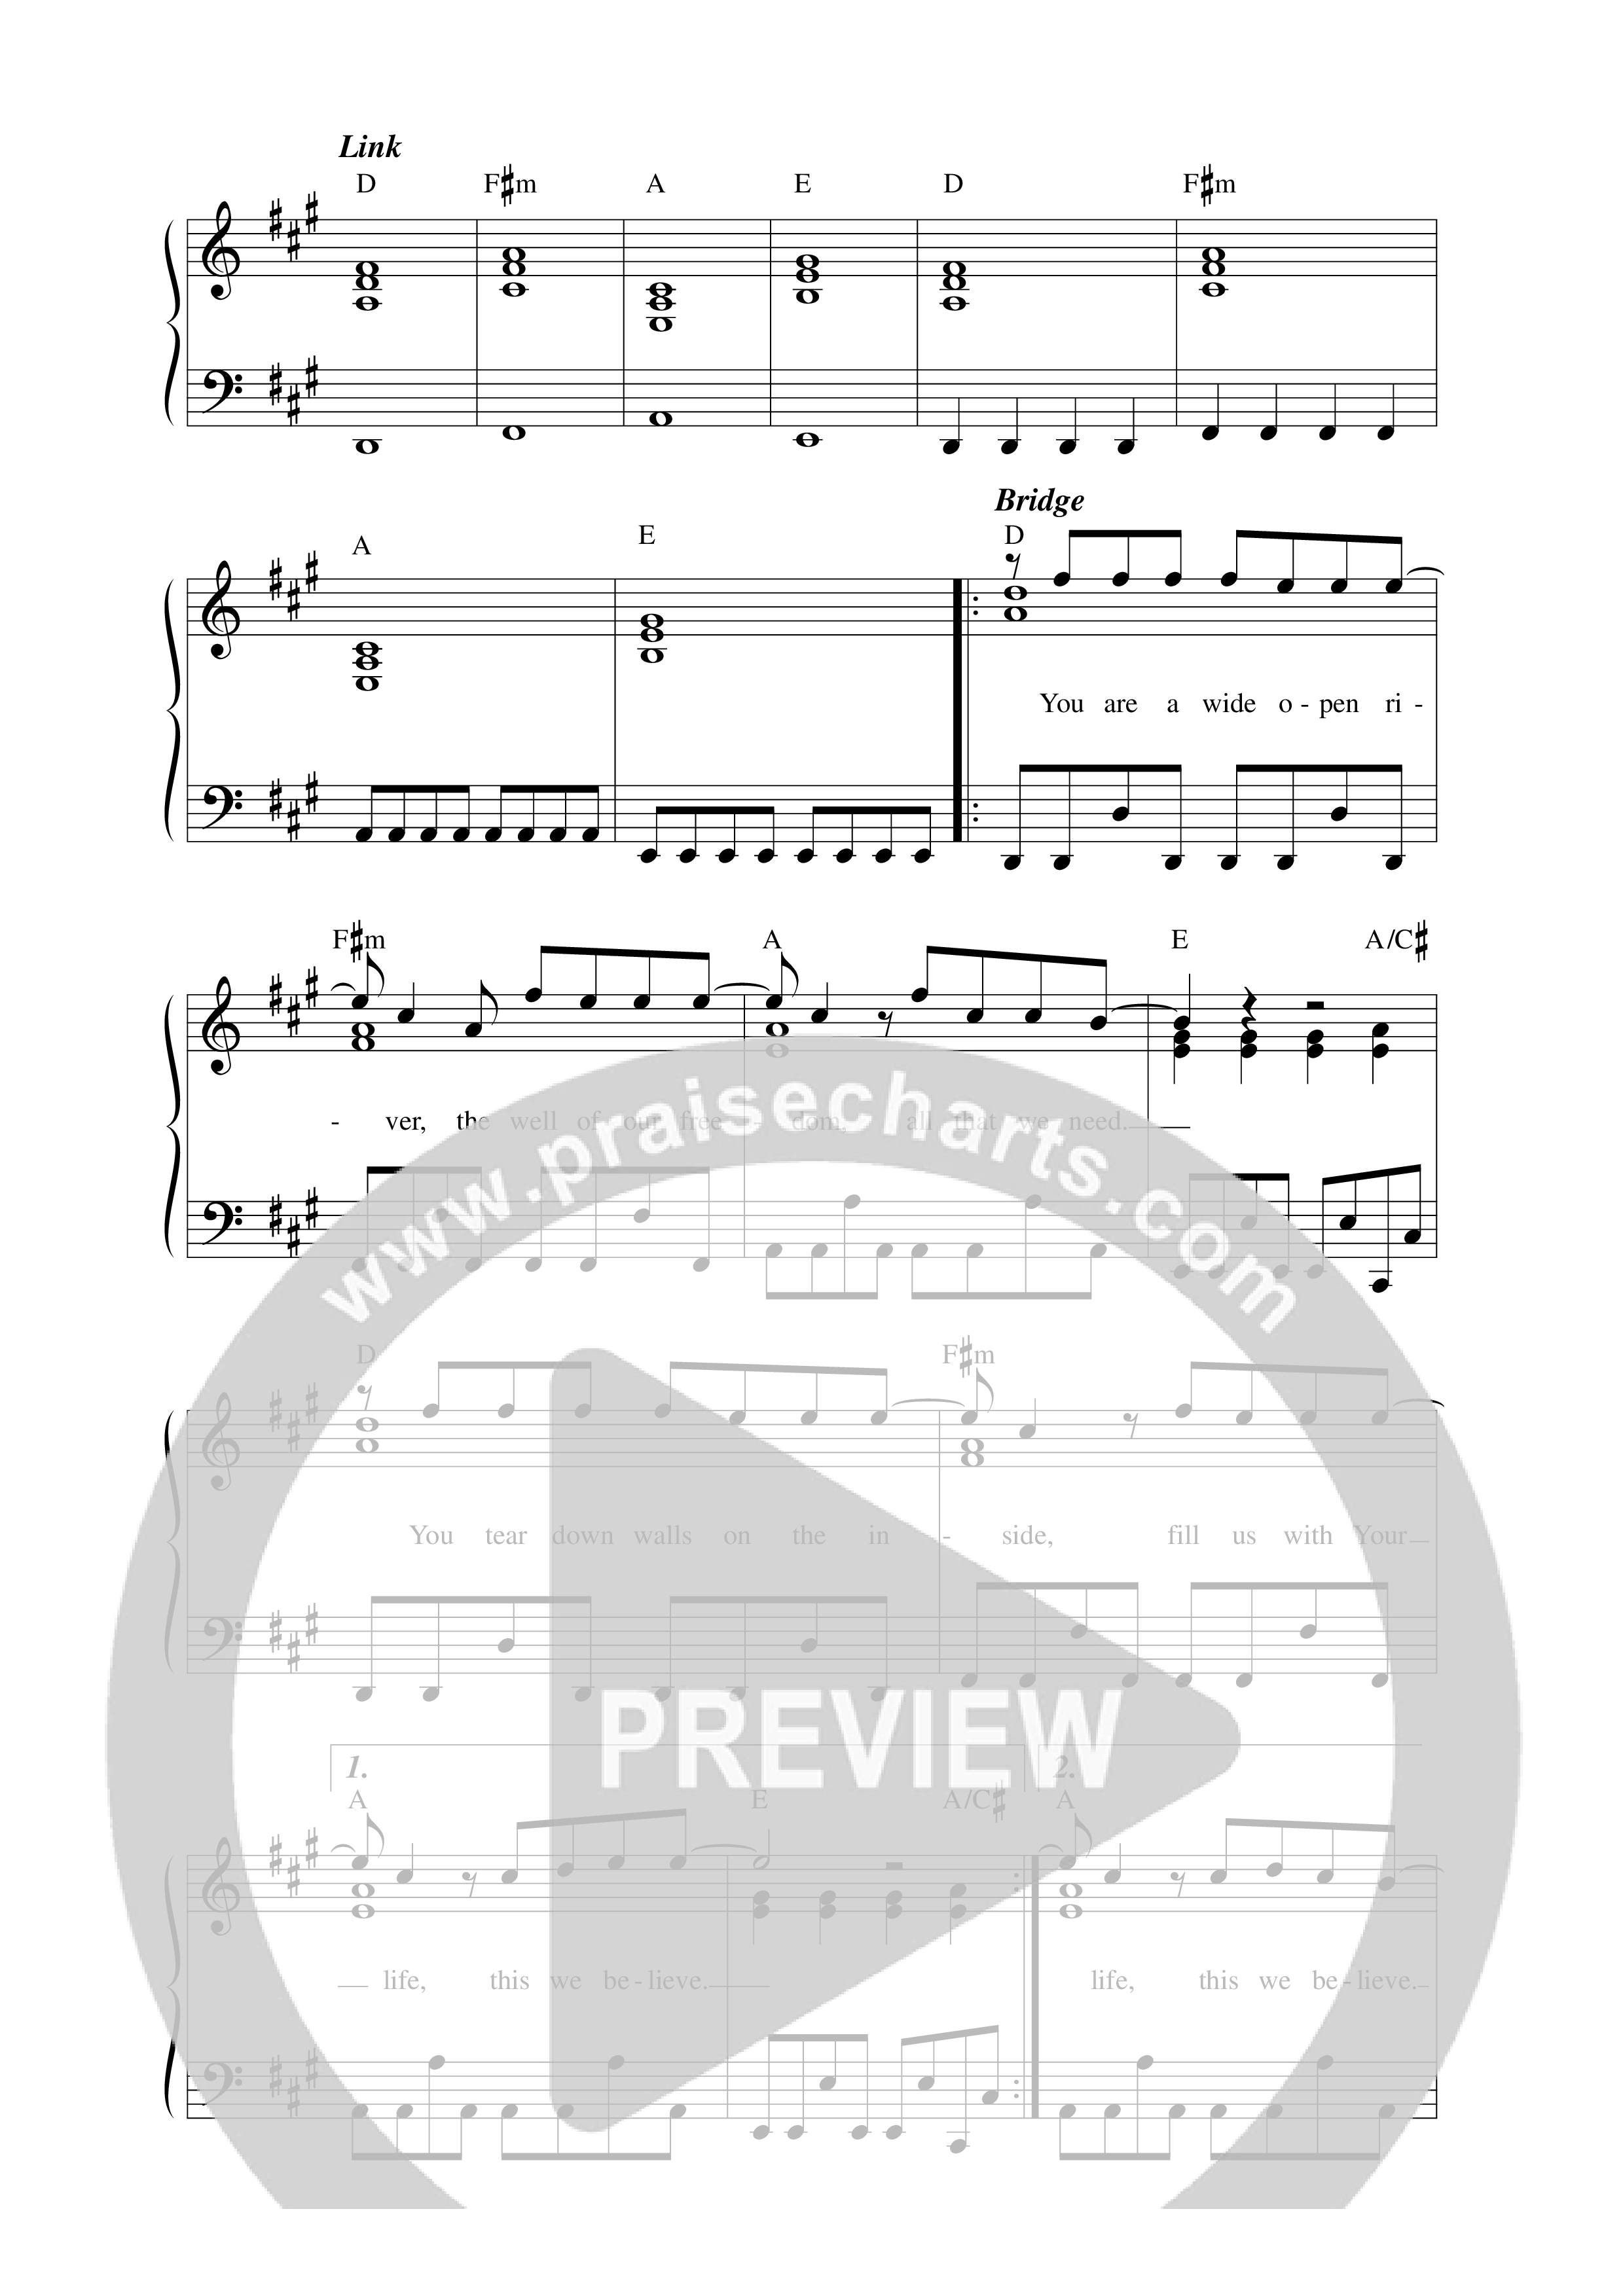 Undeserving (Ready For You) Lead Sheet Melody (ICF Worship / Dominik Laim)